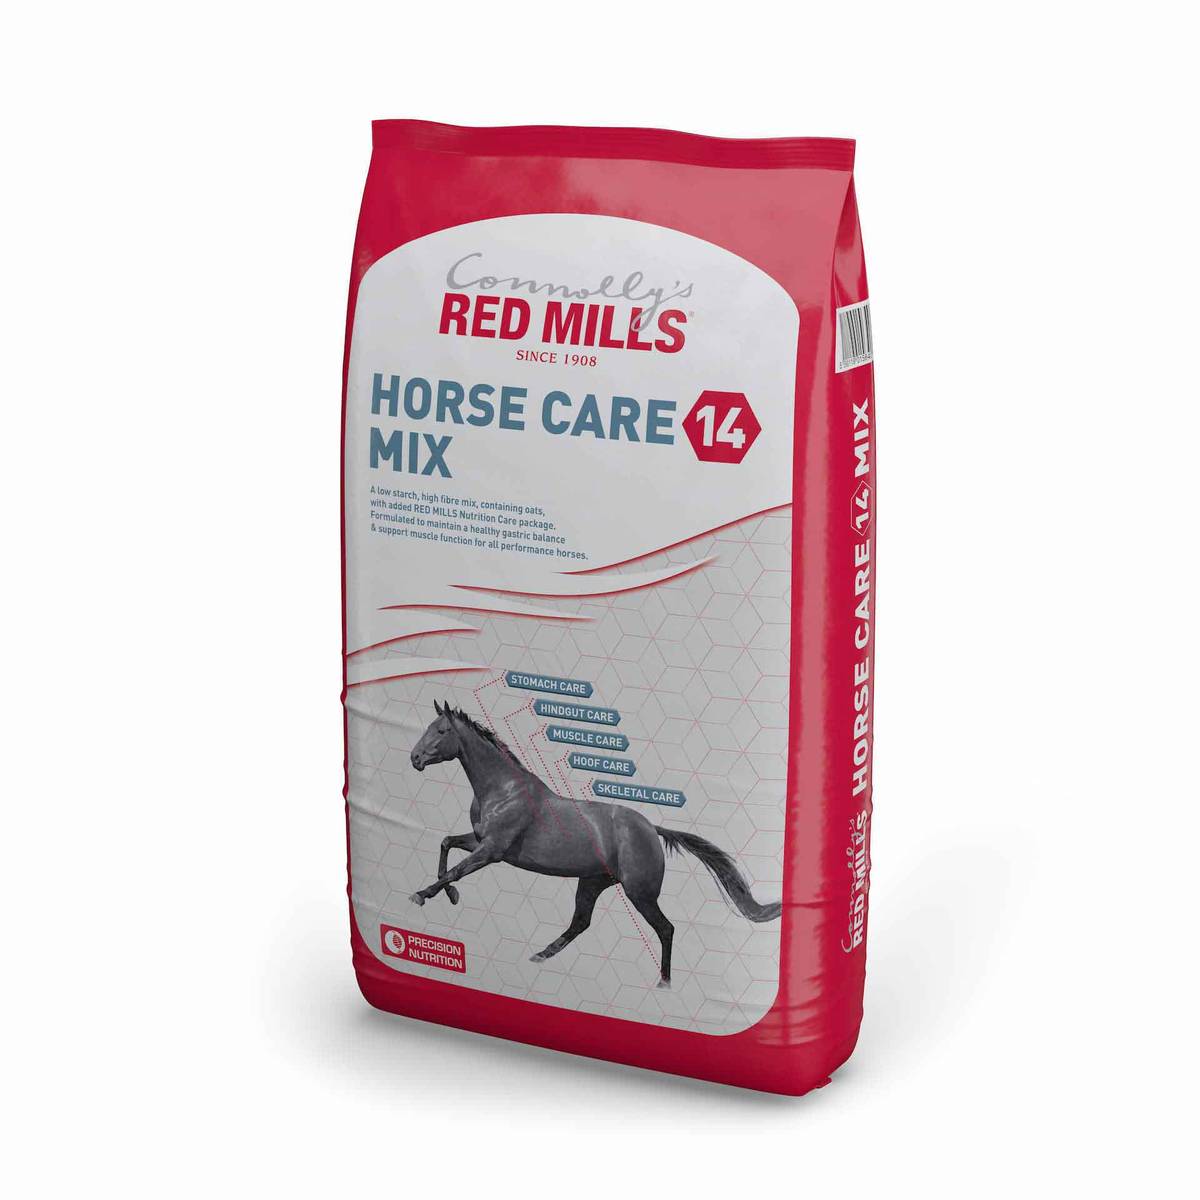 RM Horse Care 14 Mix